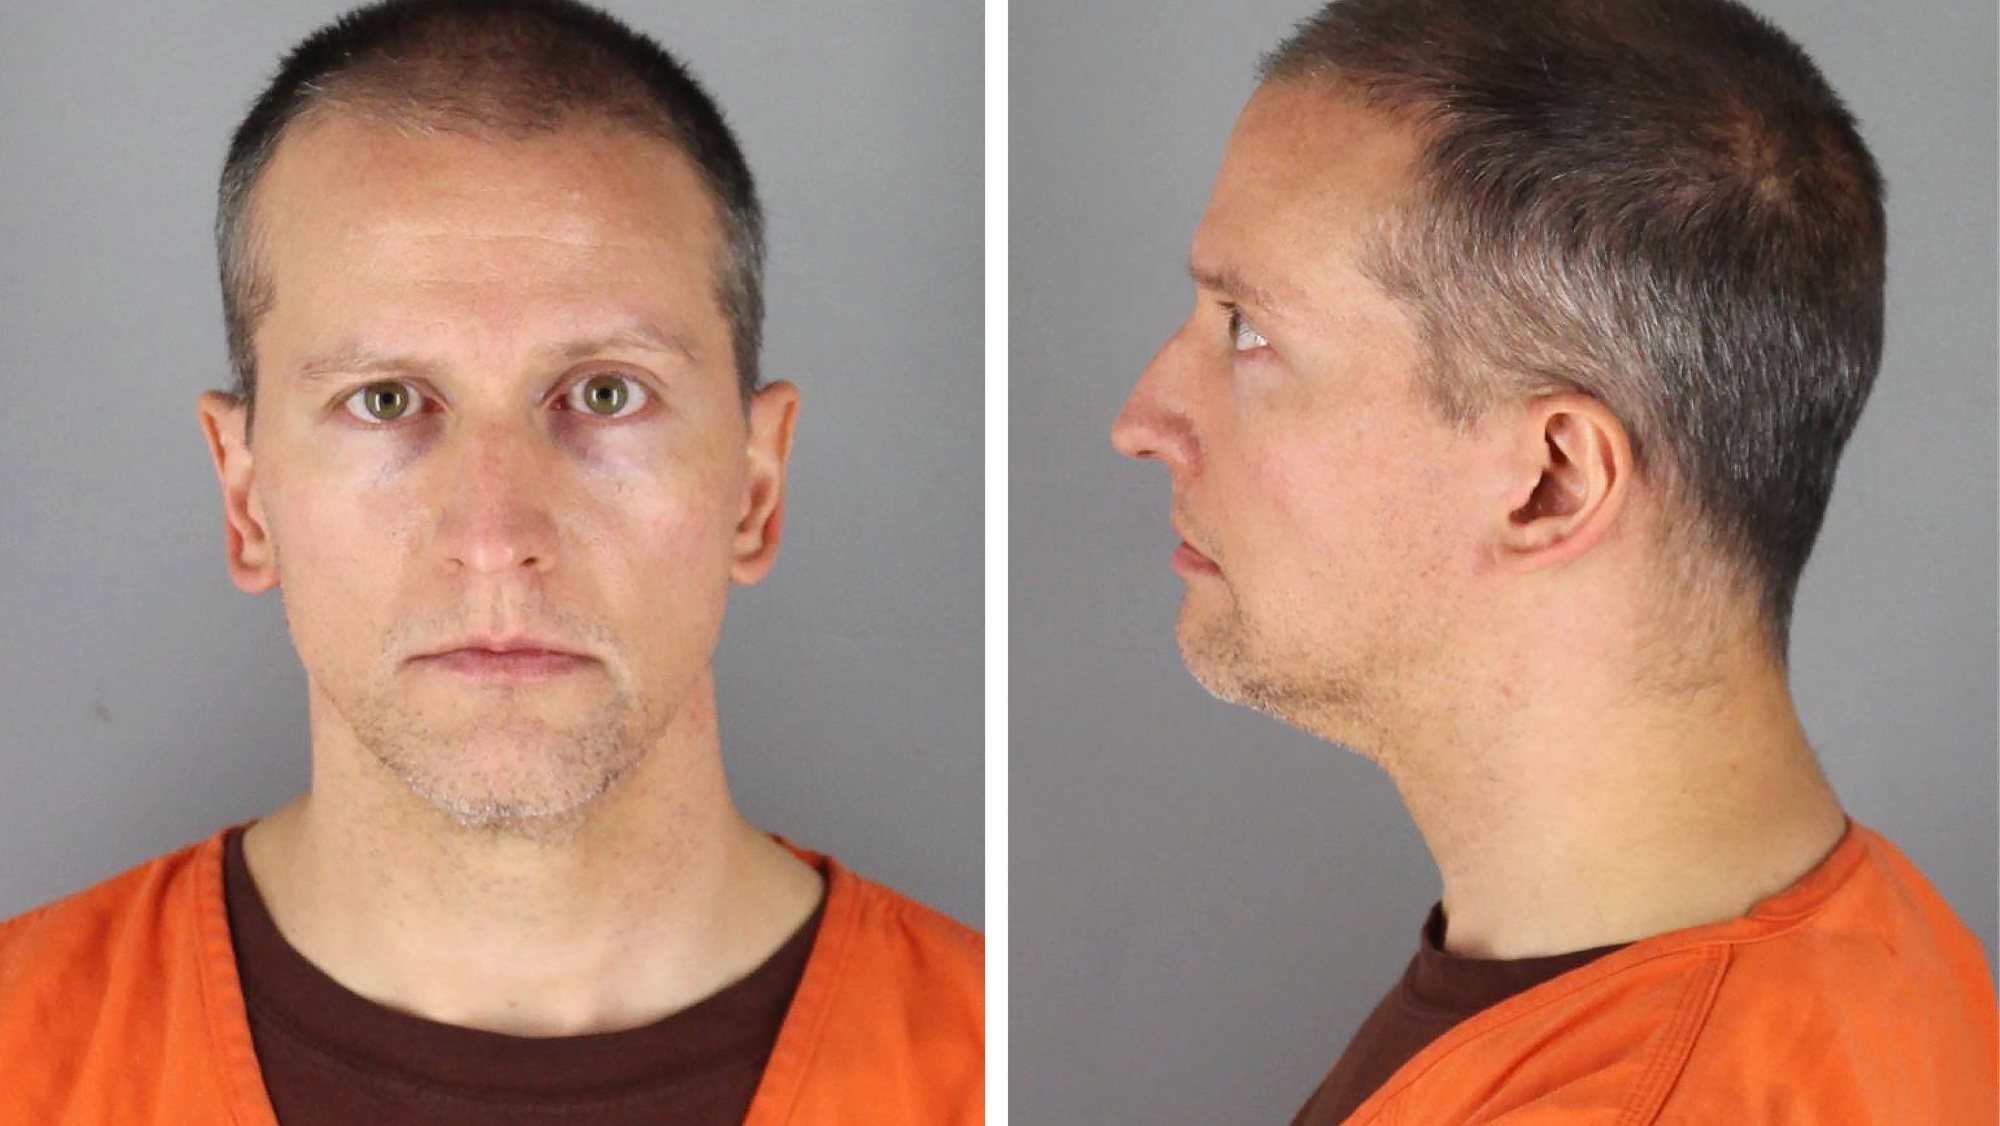 epa09148383 Handout booking photo released by the Hennepin County Sheriff&#039;s Office showing former Minneapolis Police Department Police Officer Derek Chauvin who was arrested and charged with second-degree murder, third-degree murder and second-degree manslaughter in the death of George Floyd in Minneapolis, Minnesota, USA, 12 June 2020 (reissued 20 April 2021). Former Minneapolis police officer Derek Chauvin was found guilty on all counts in the death of George Floyd on 20 April 2021.  EPA/HENNEPIN COUNTY SHERIFF / HANDOUT  HANDOUT EDITORIAL USE ONLY/NO SALES *** Local Caption *** 56147358